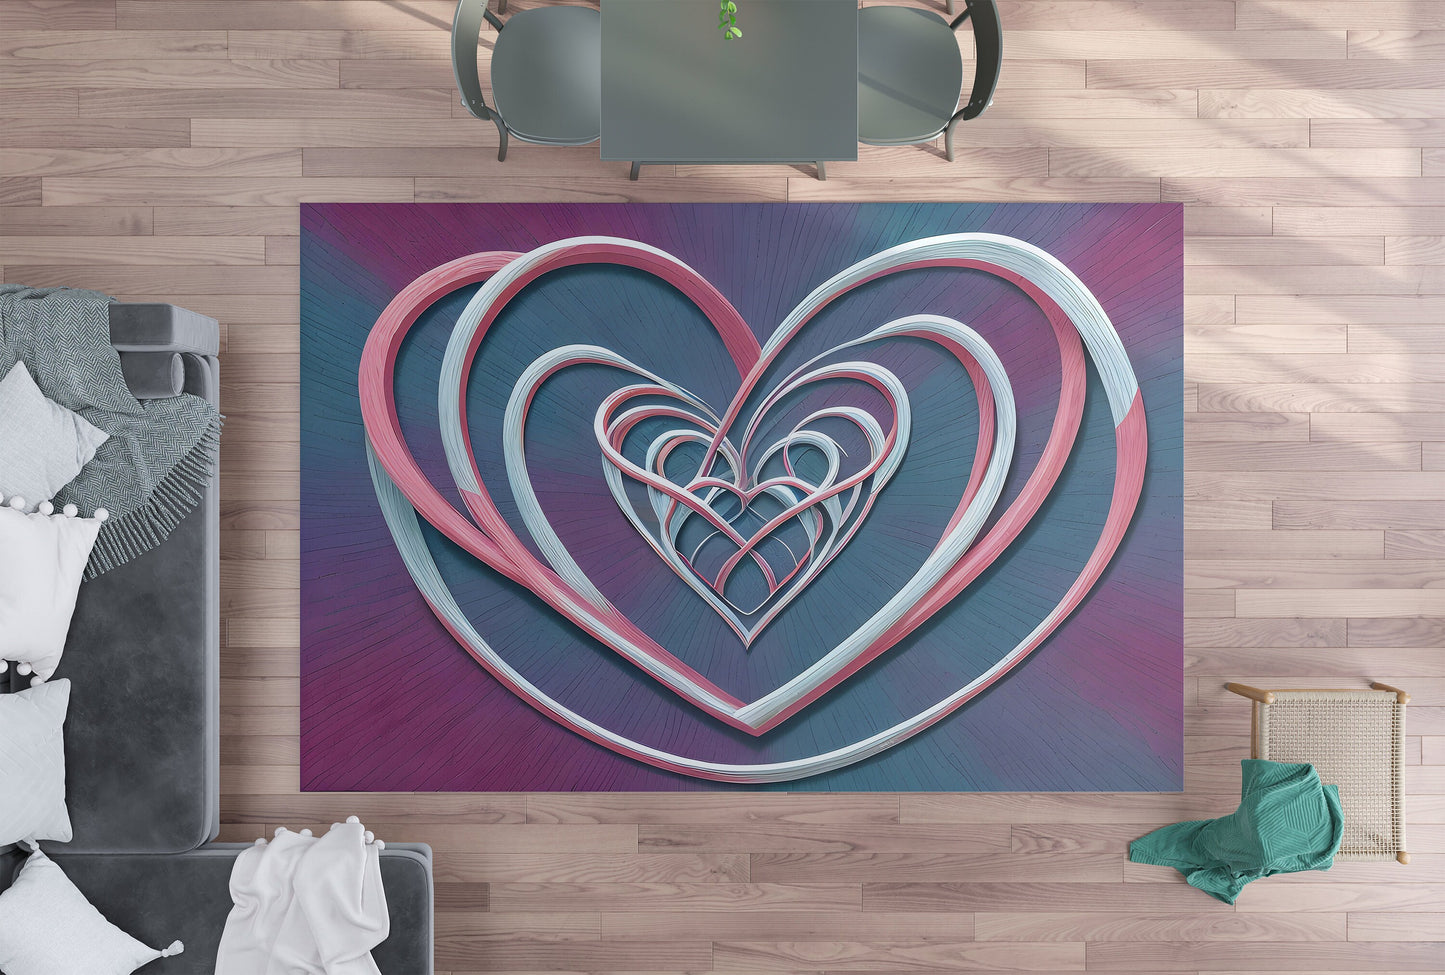 Heart Rug Pink blue hearts Rug Intertwined hearts Floor Rugs 3'x5' 4'x6' 5'x7' 8' x 10' Large rugs love